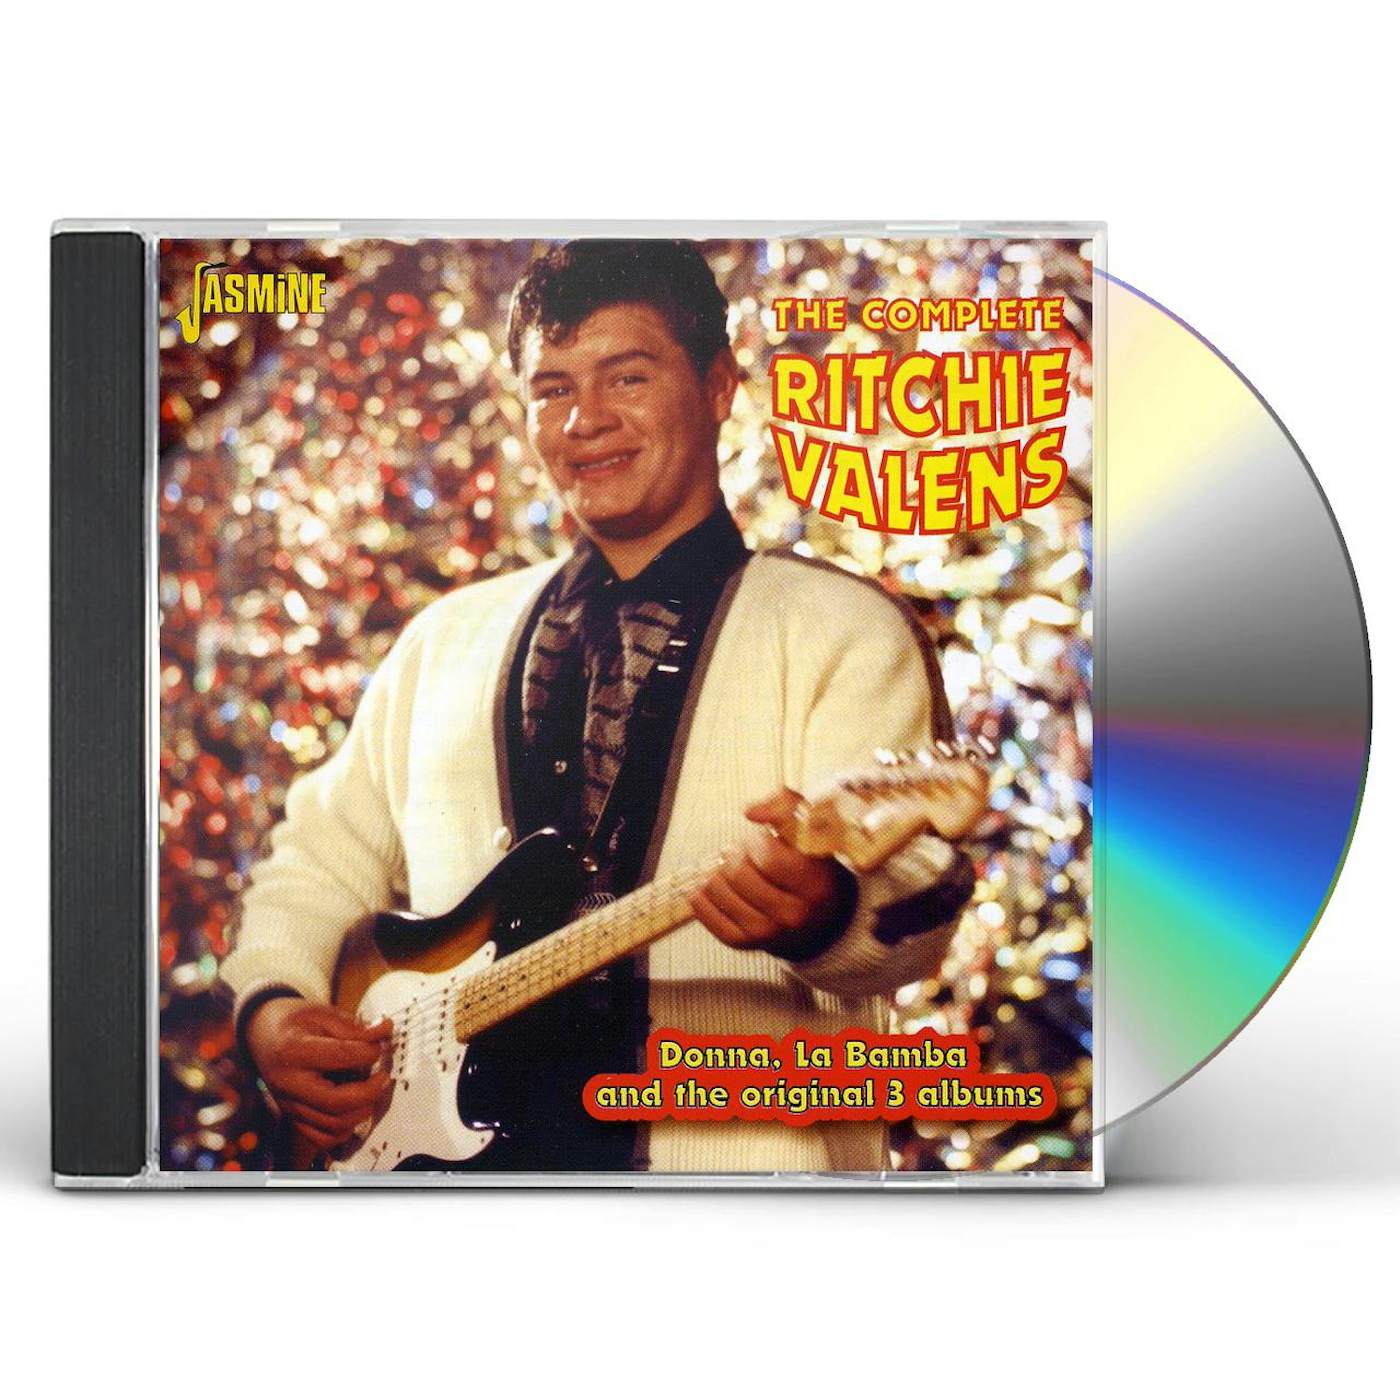 Ritchie Valens COMPLETE RECORDINGS CD